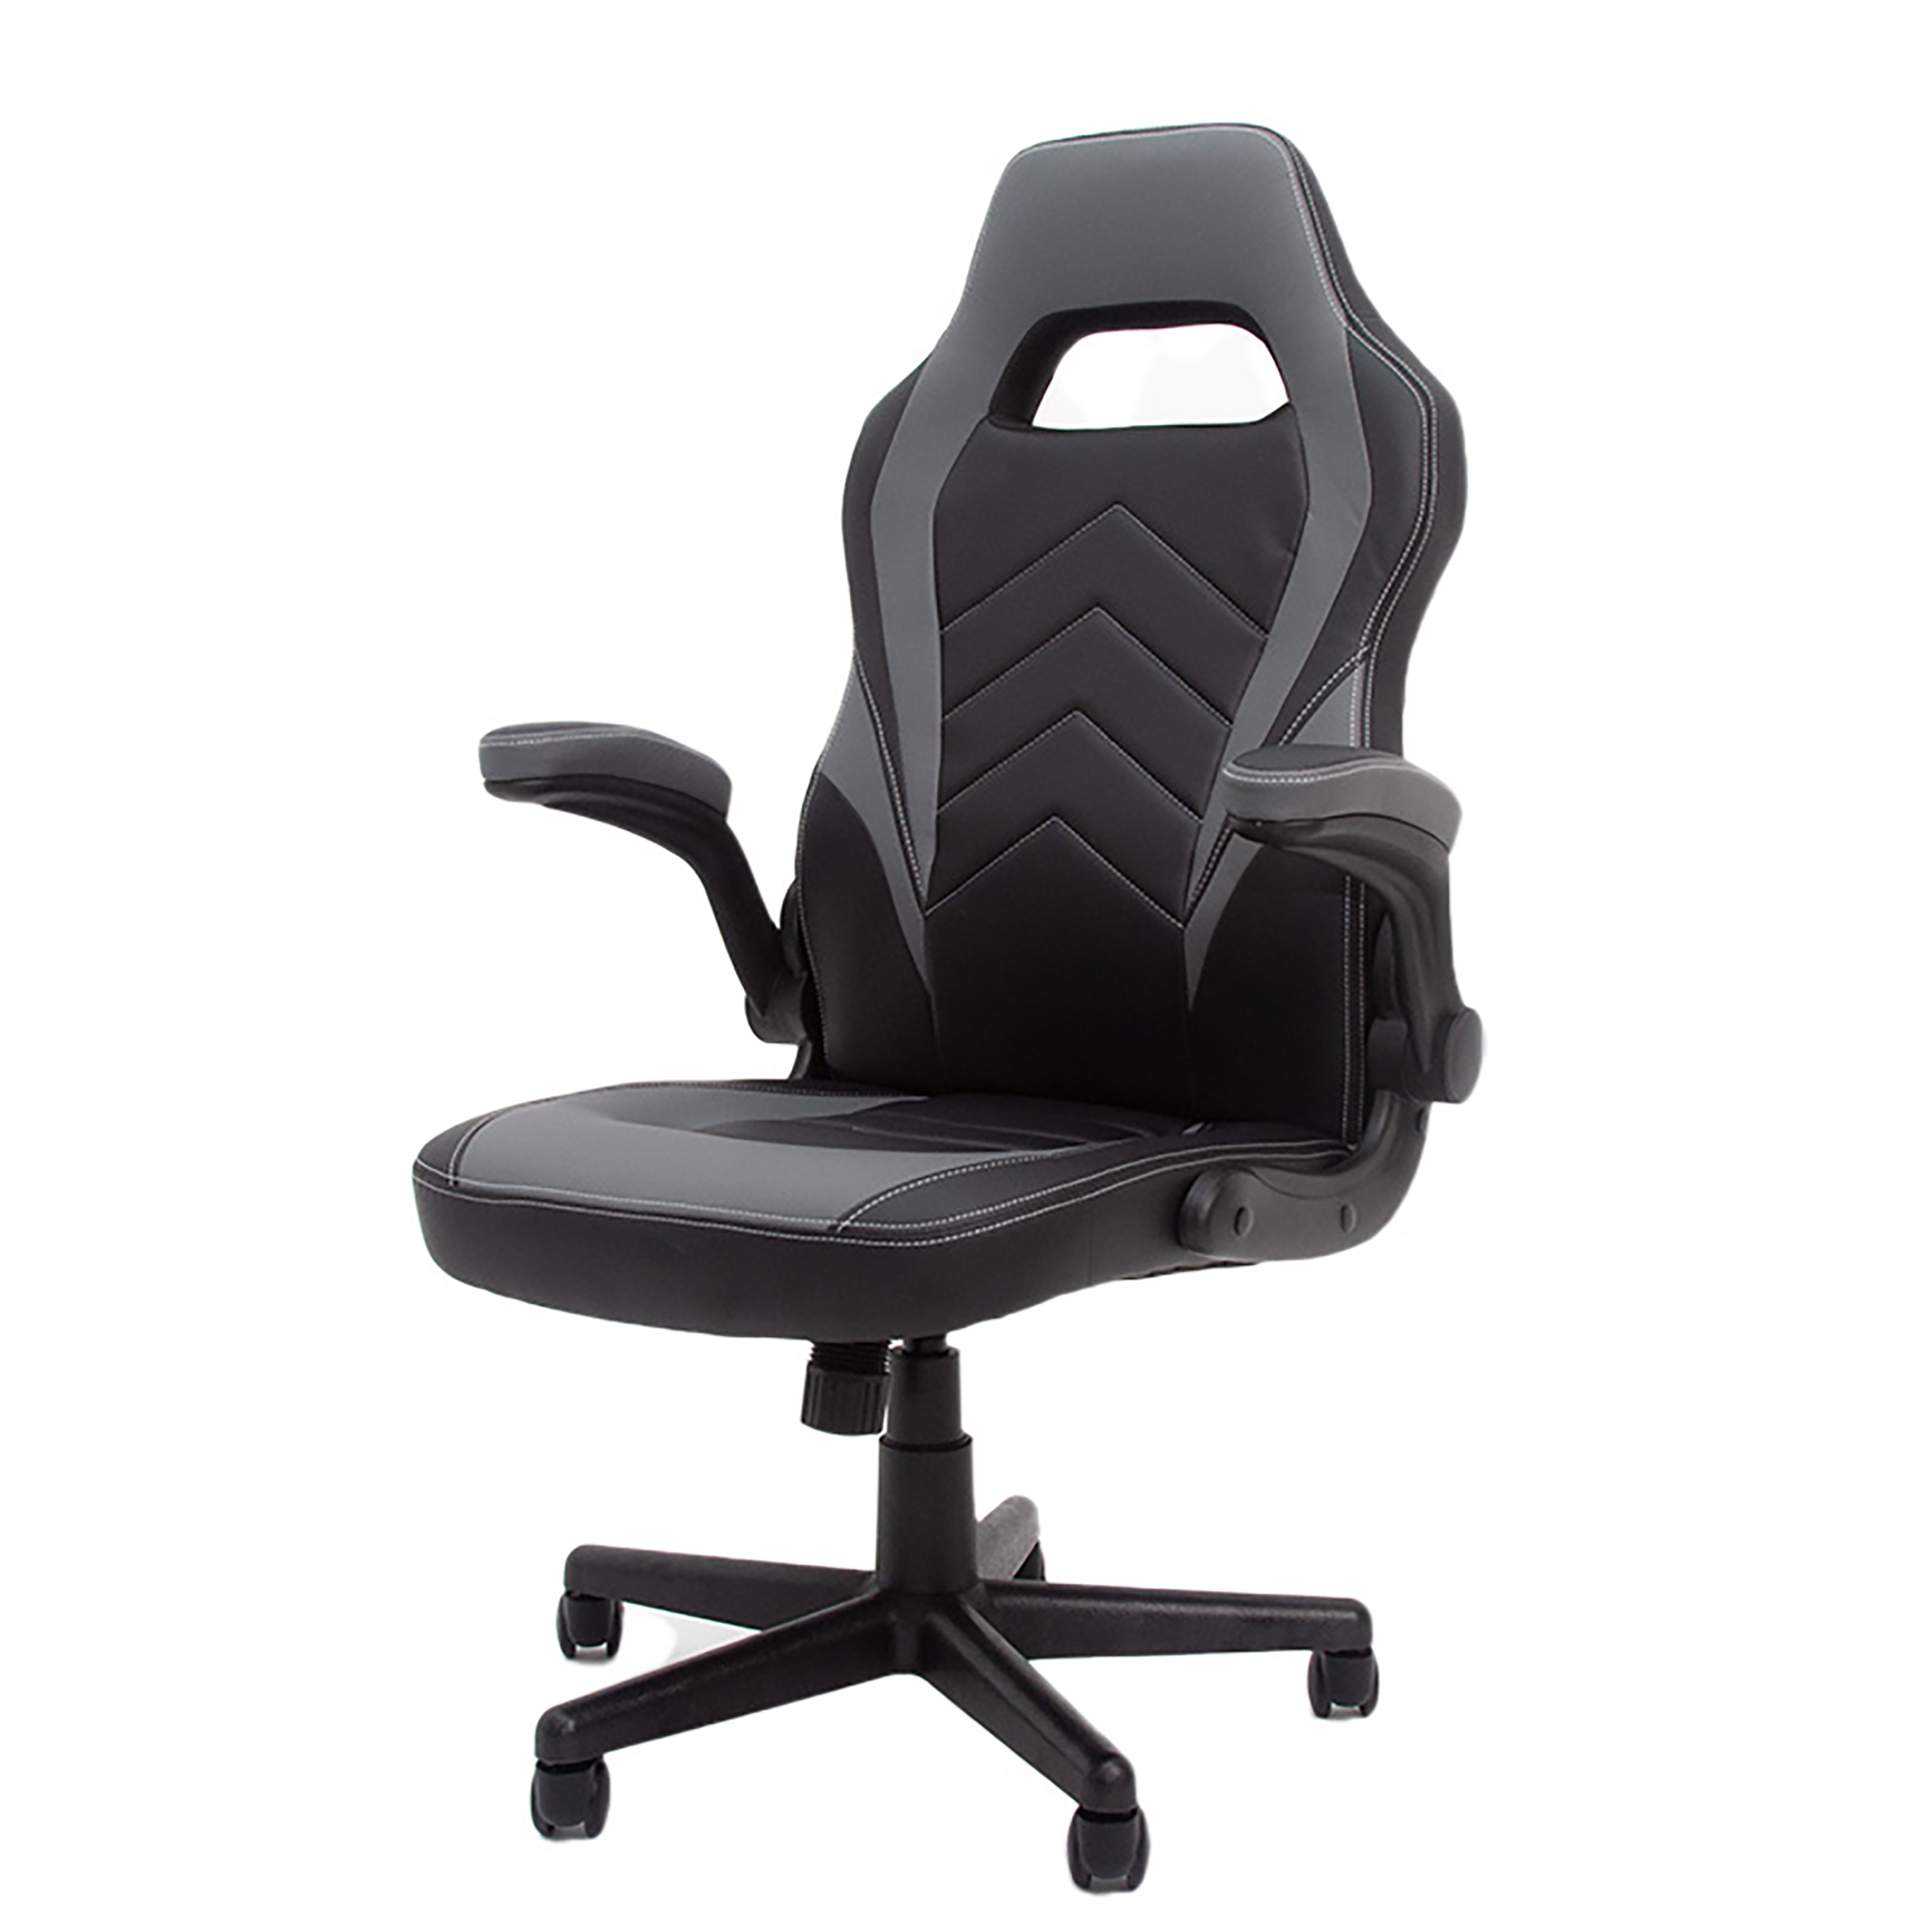 Photos - Other for Computer Busbi Falcon Gaming Chair - Black/Grey K1-FALC-G